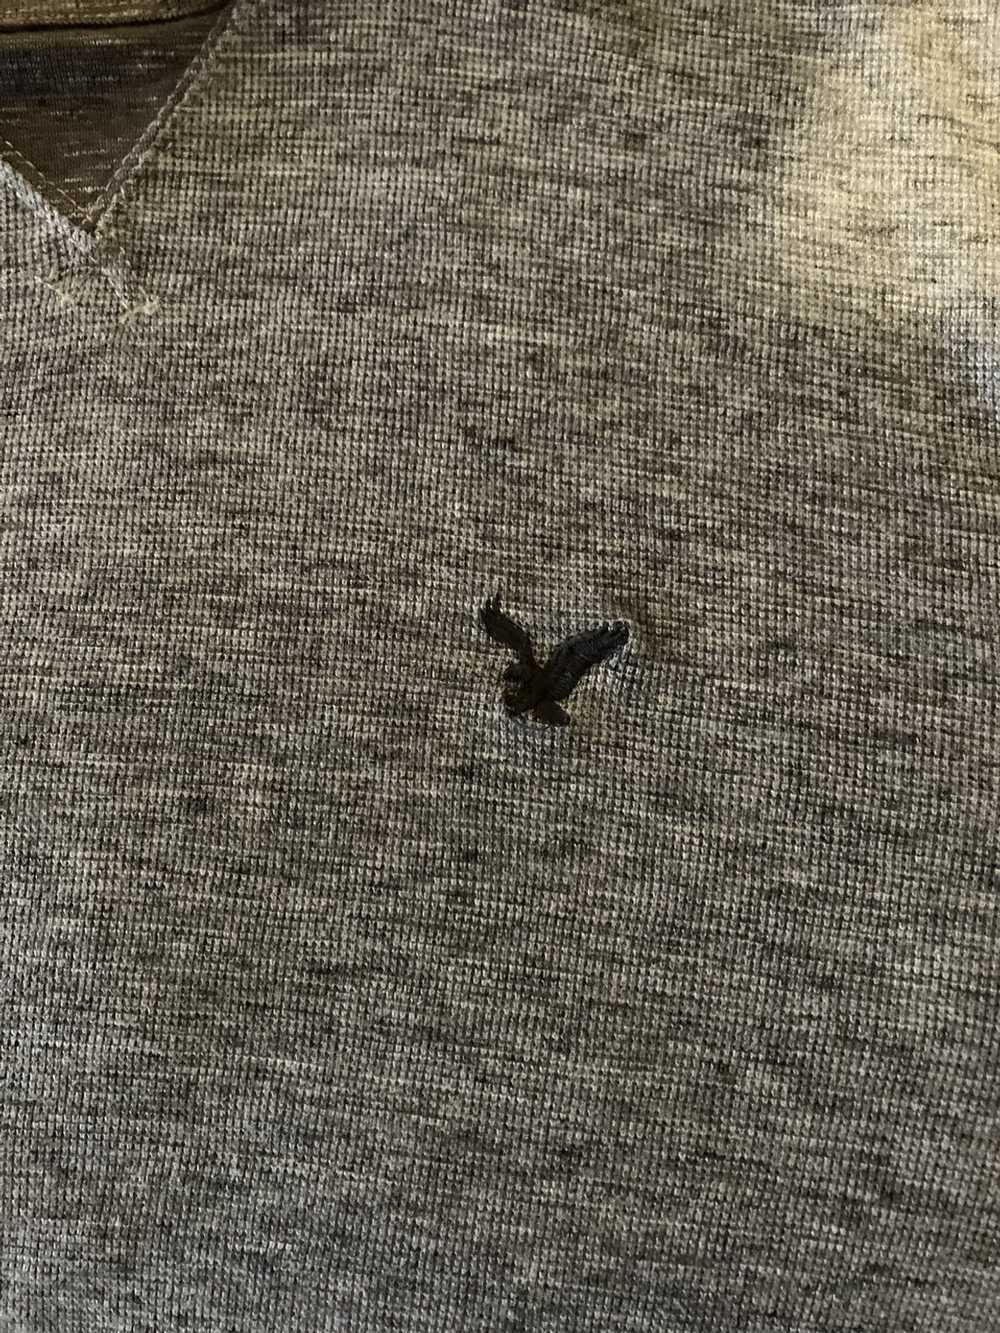 American Eagle Outfitters Waffle Thermal Hoodie - image 3